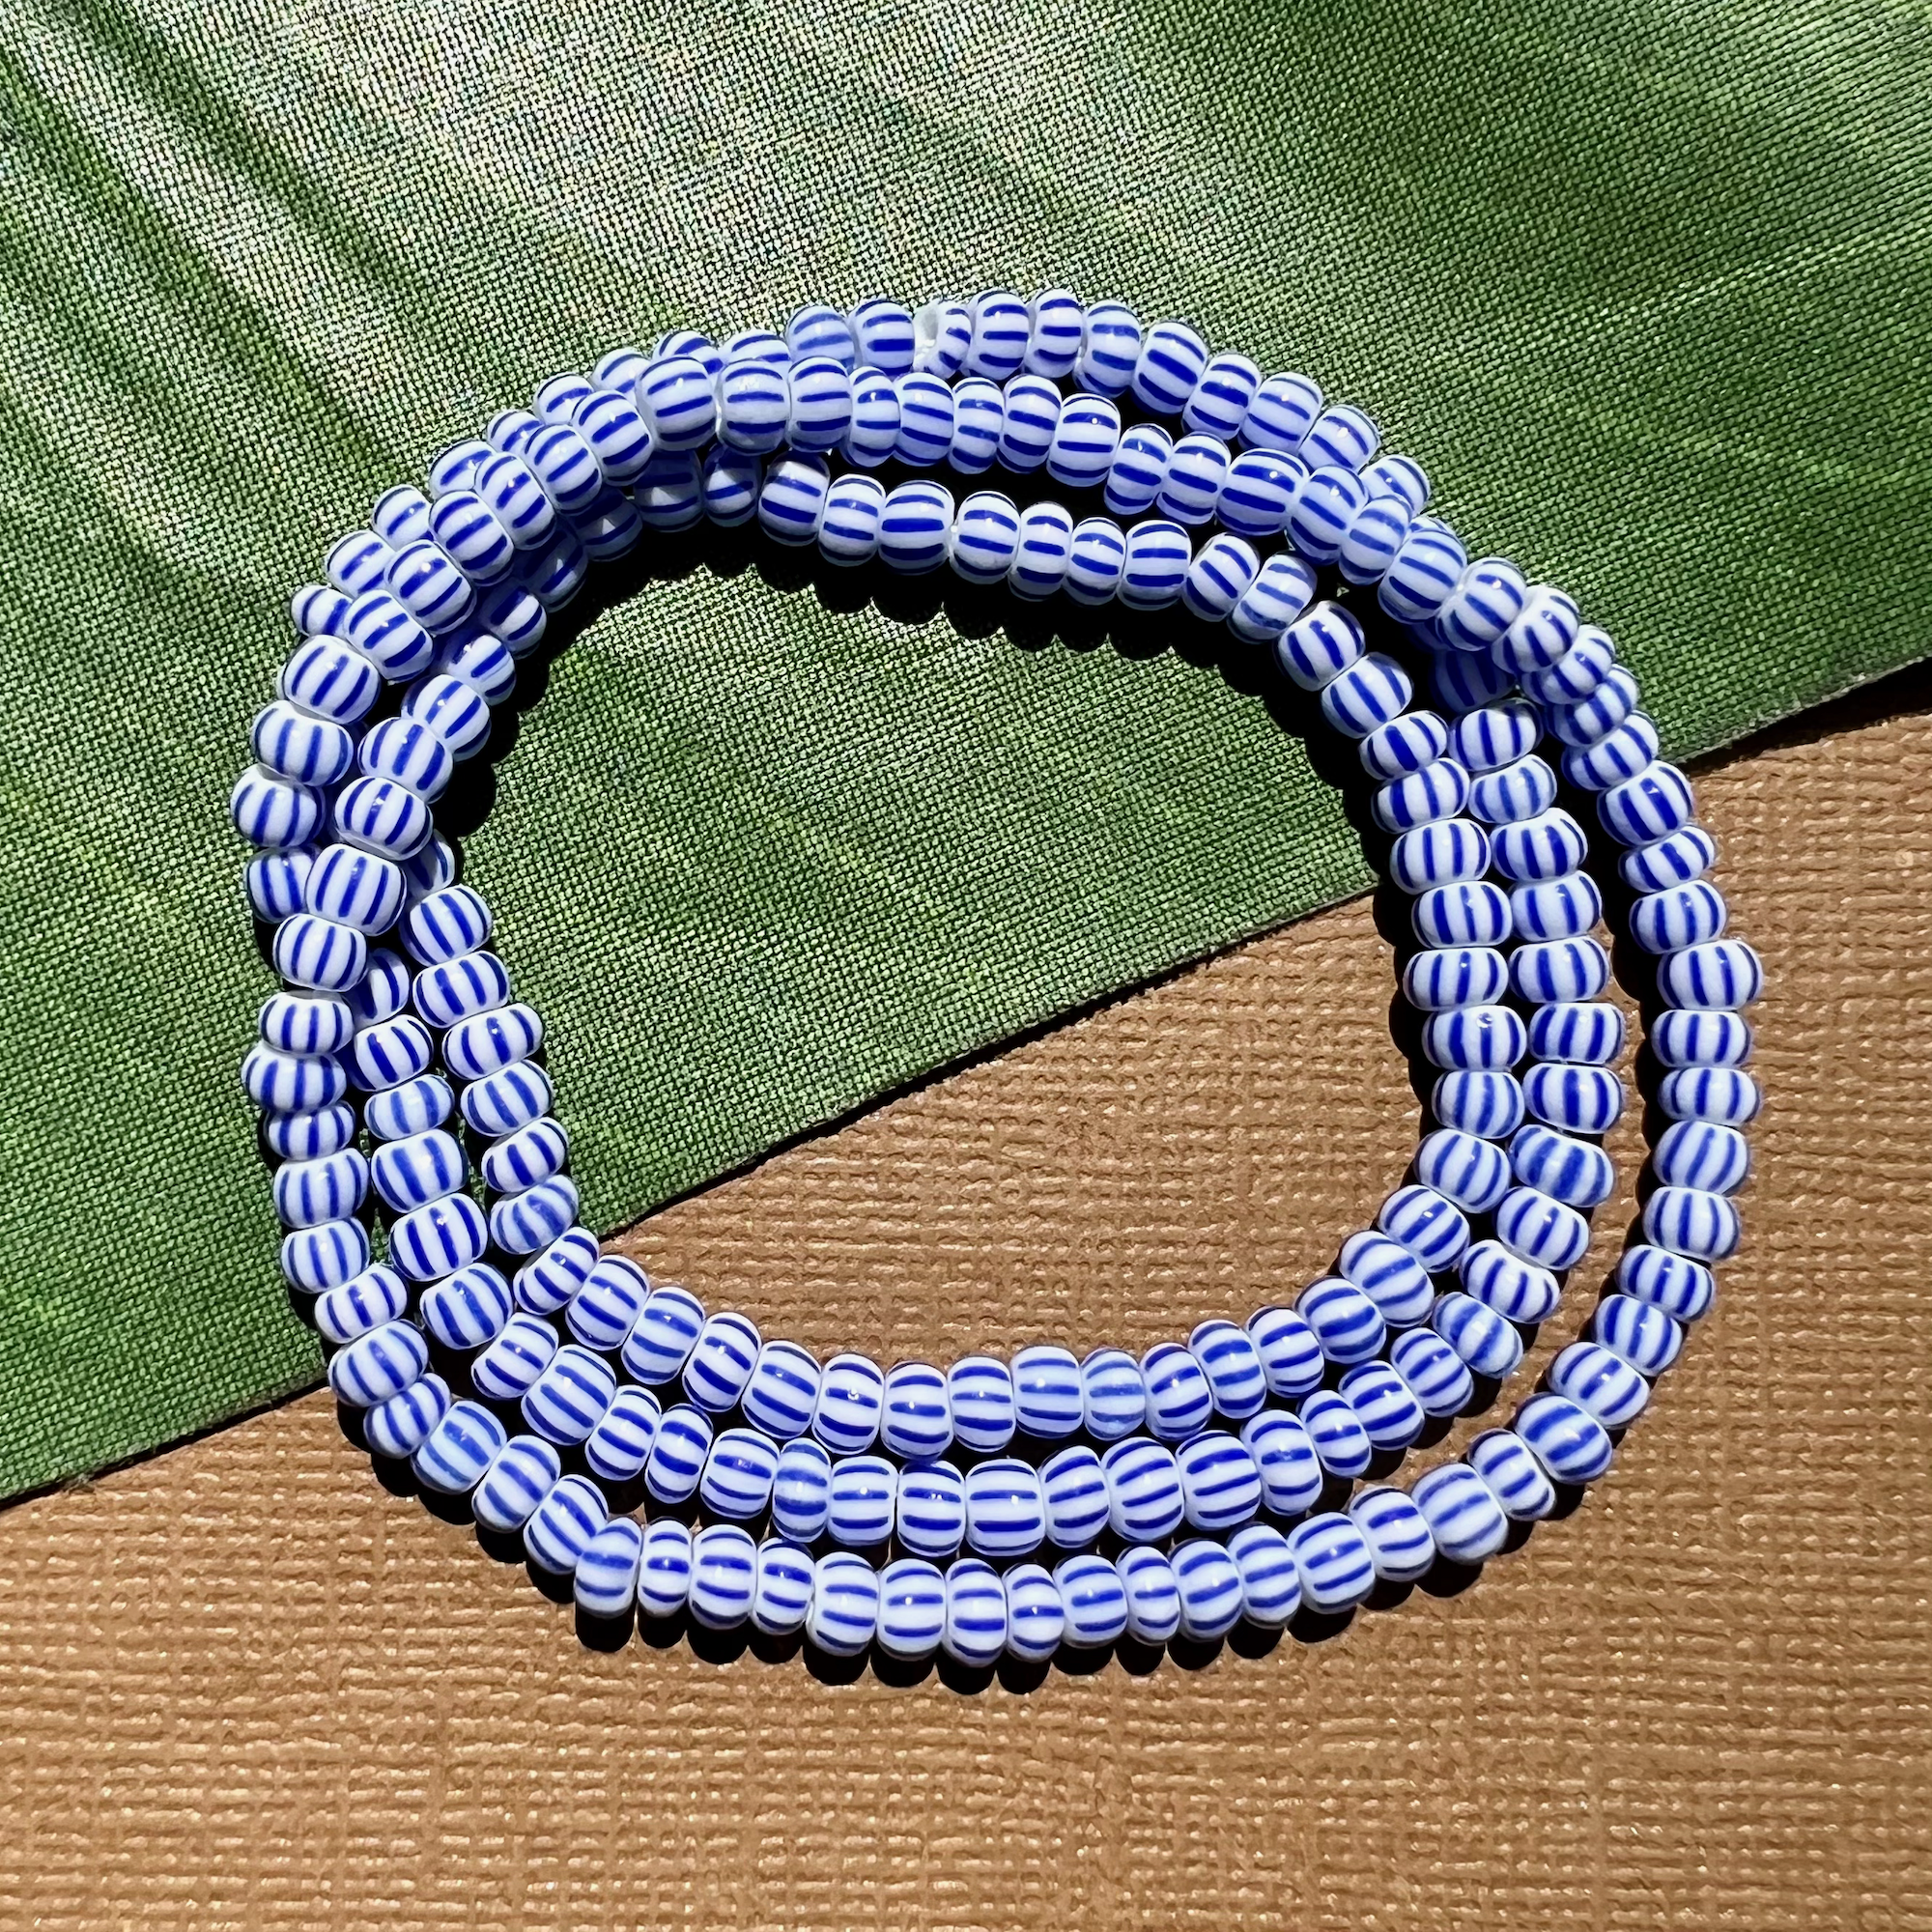 Blue & White striped Czech seed beads